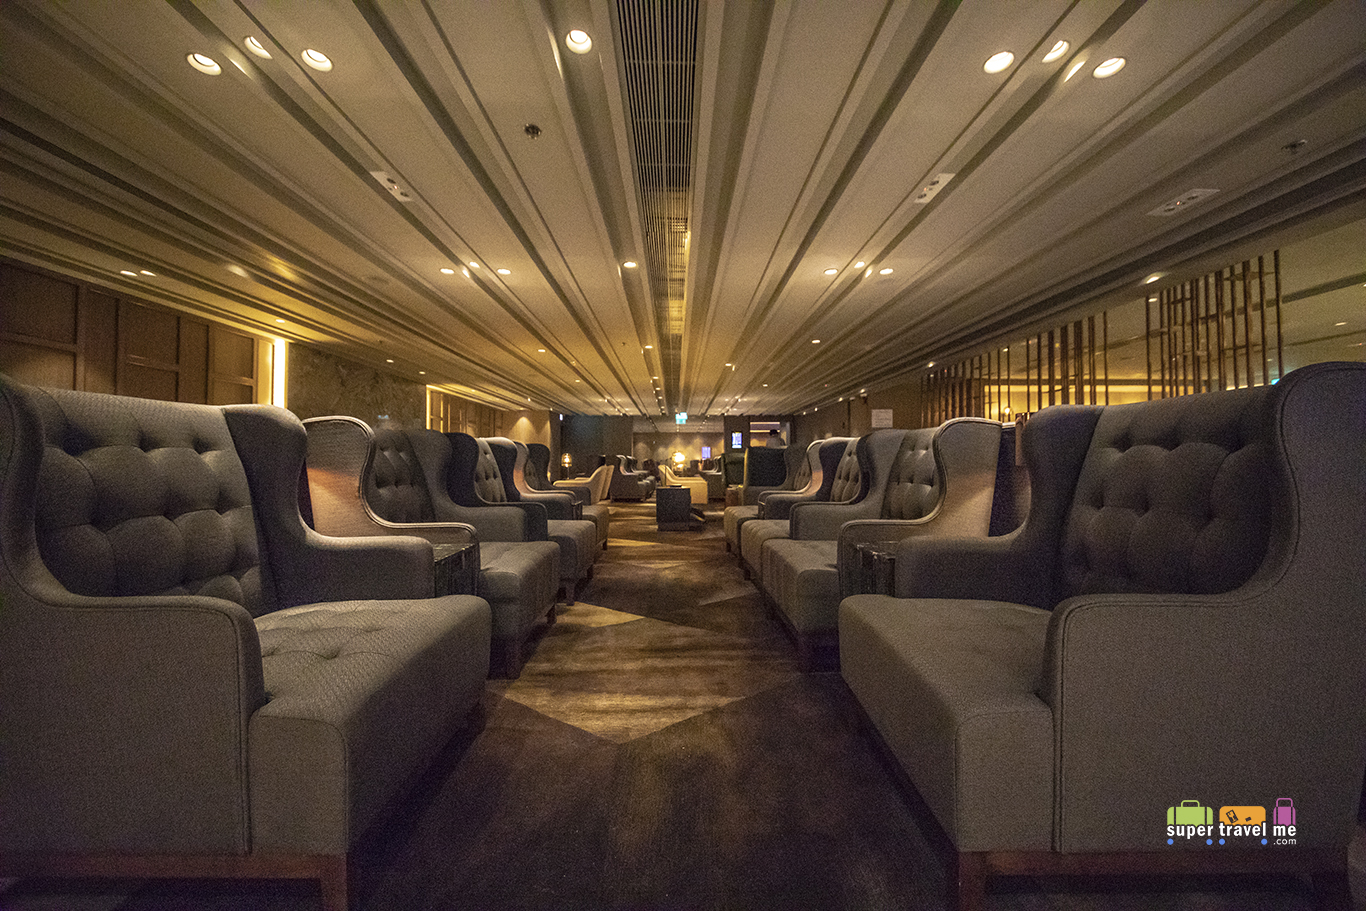 A relaxed and comfortable seating area for guests at Plaza Premium First Hong Kong